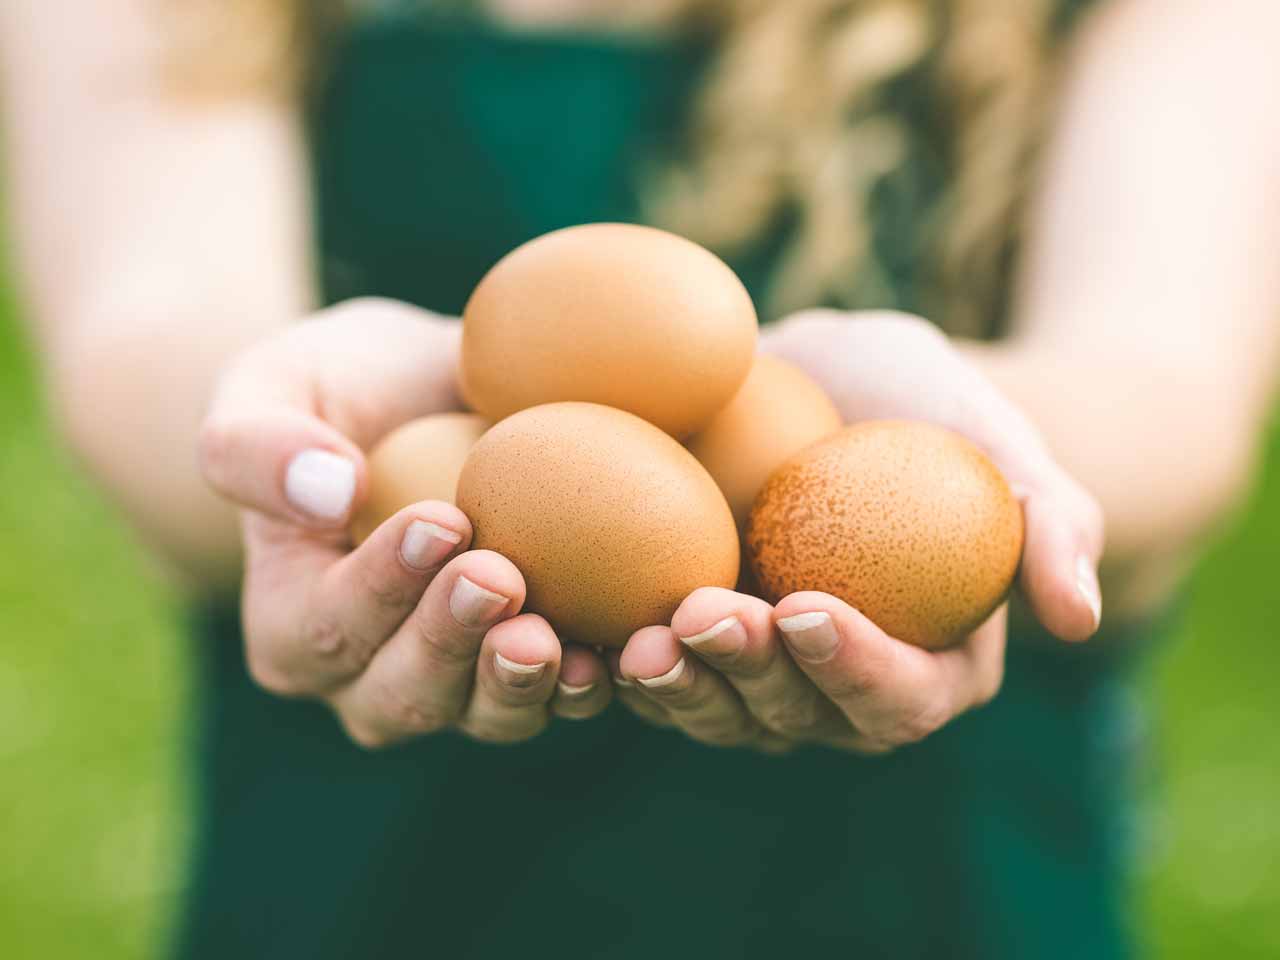 10 reasons to eat more eggs